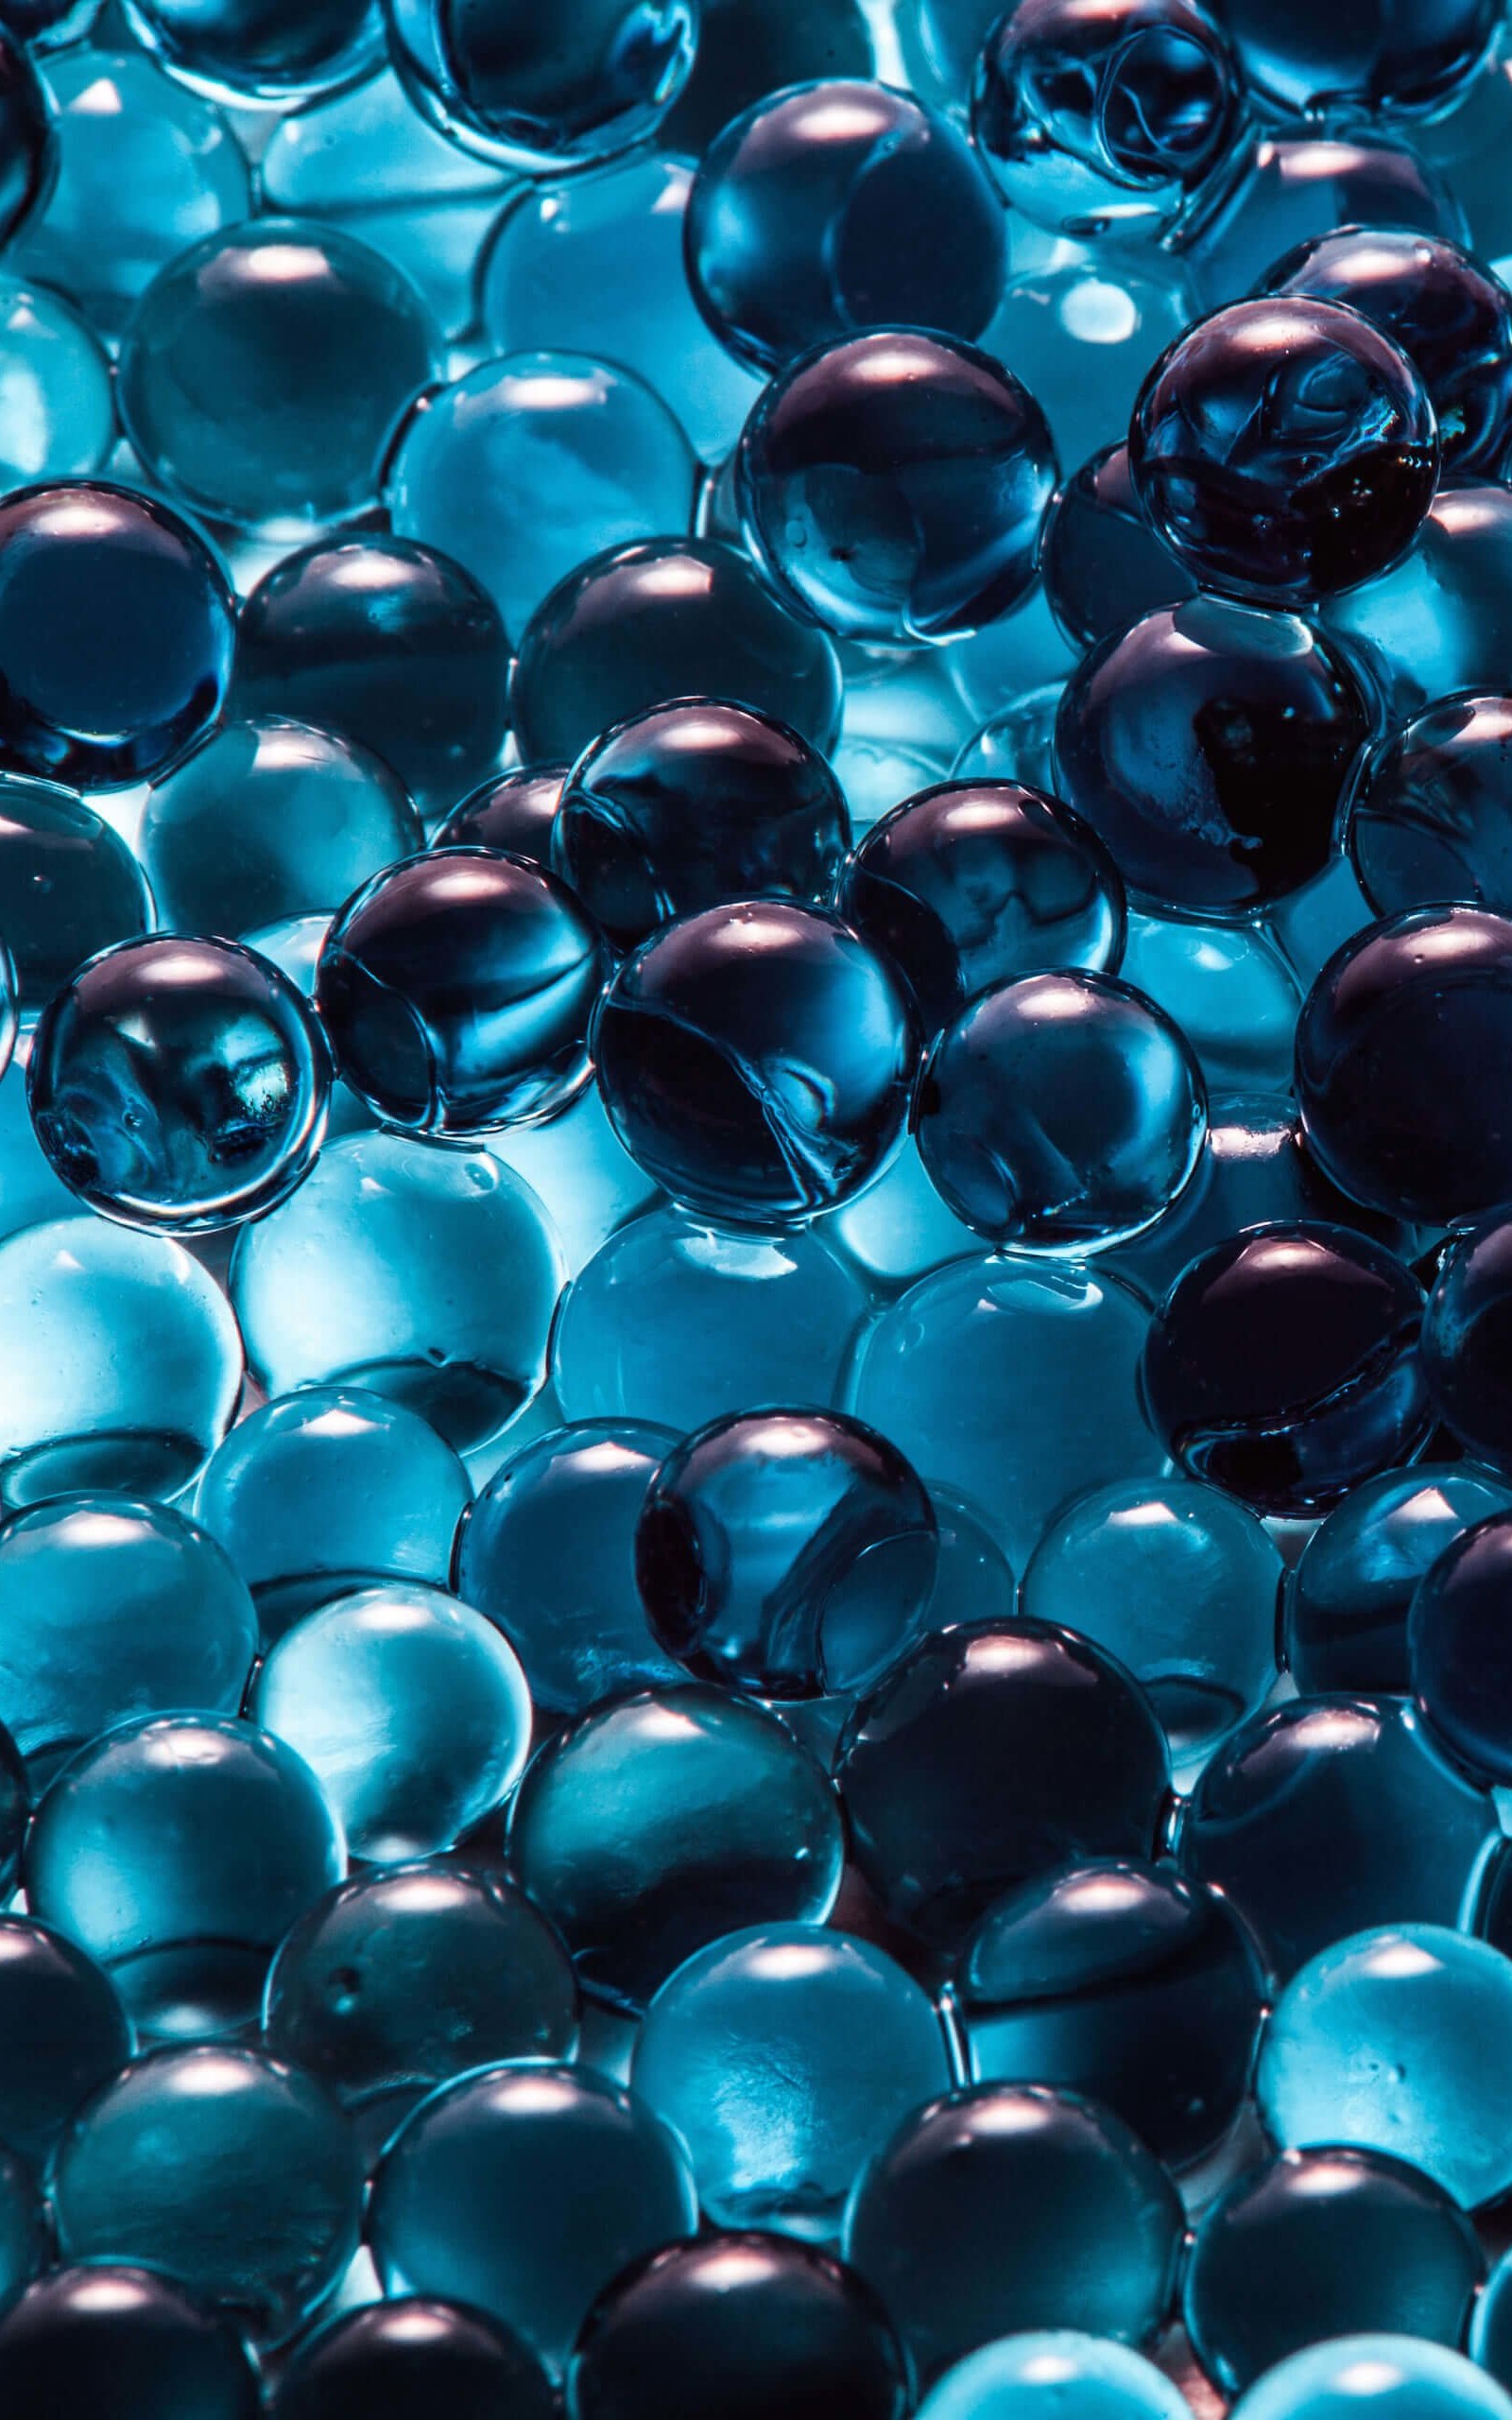 Water Beads Wallpaper for Amazon Kindle Fire HDX 8.9